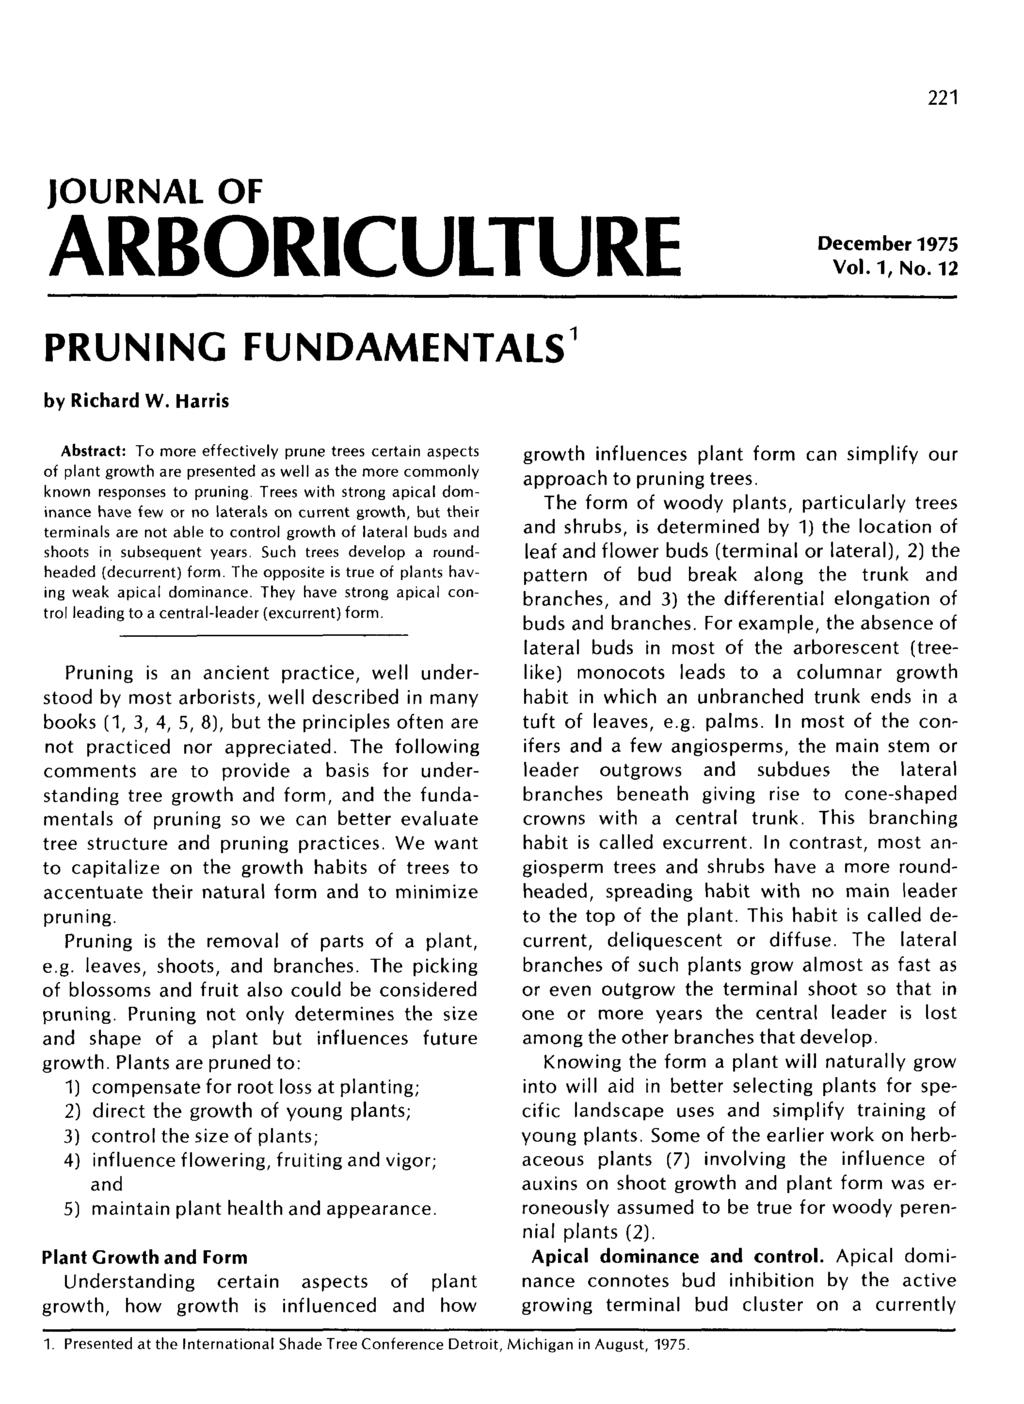 221 JOURNAL OF ARBORICULTURE December 1975 Vol.1, No. 12 PRUNING FUNDAMENTALS by Richard W.